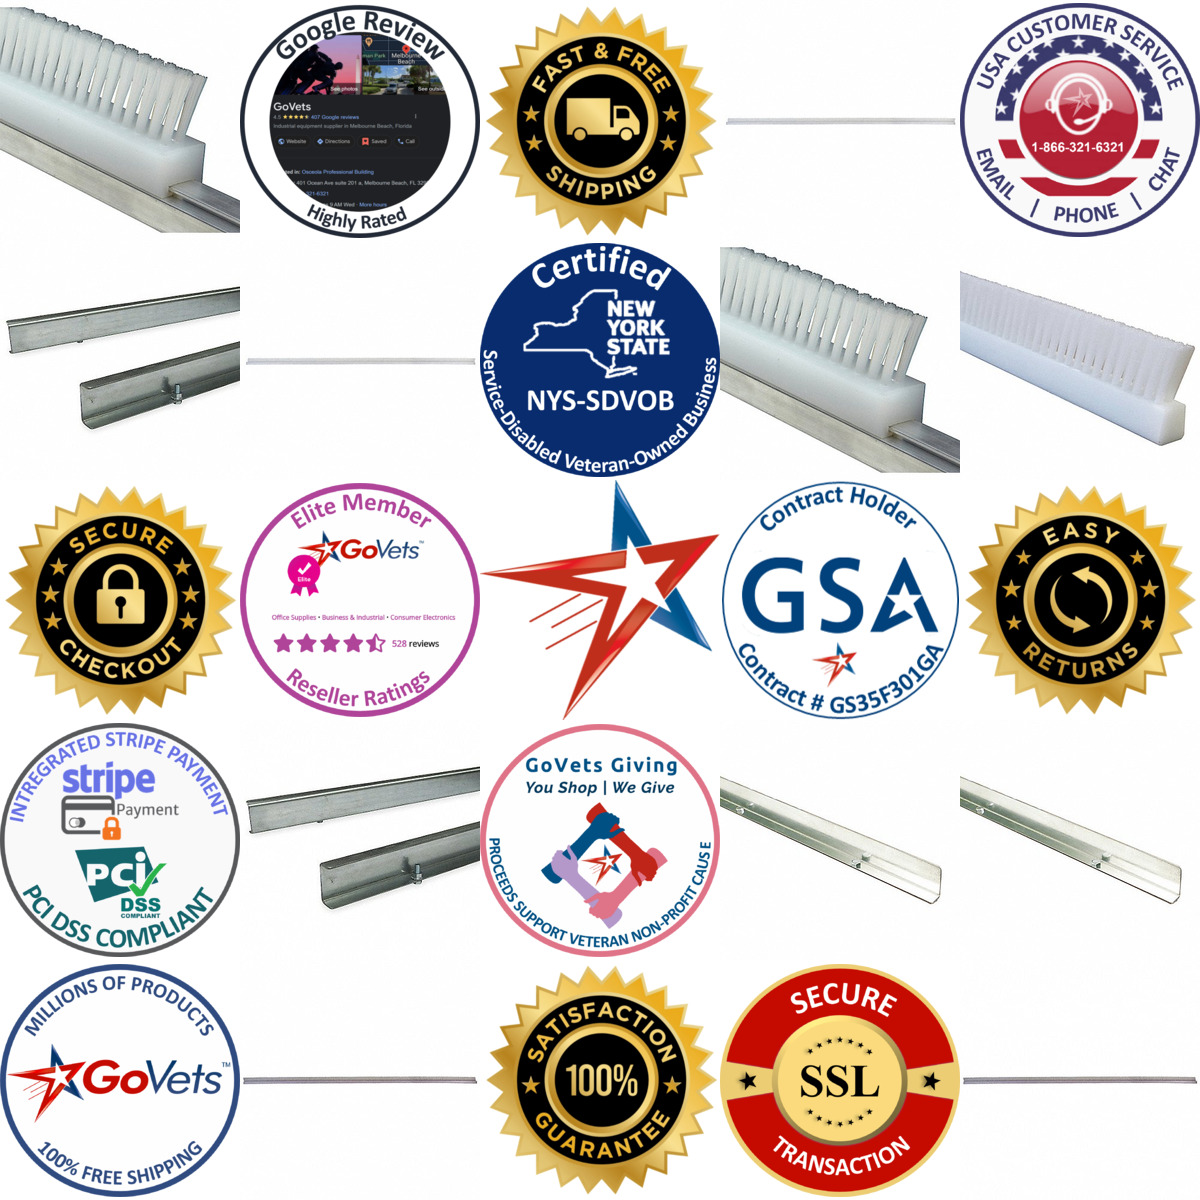 A selection of Conveyor Guides products on GoVets